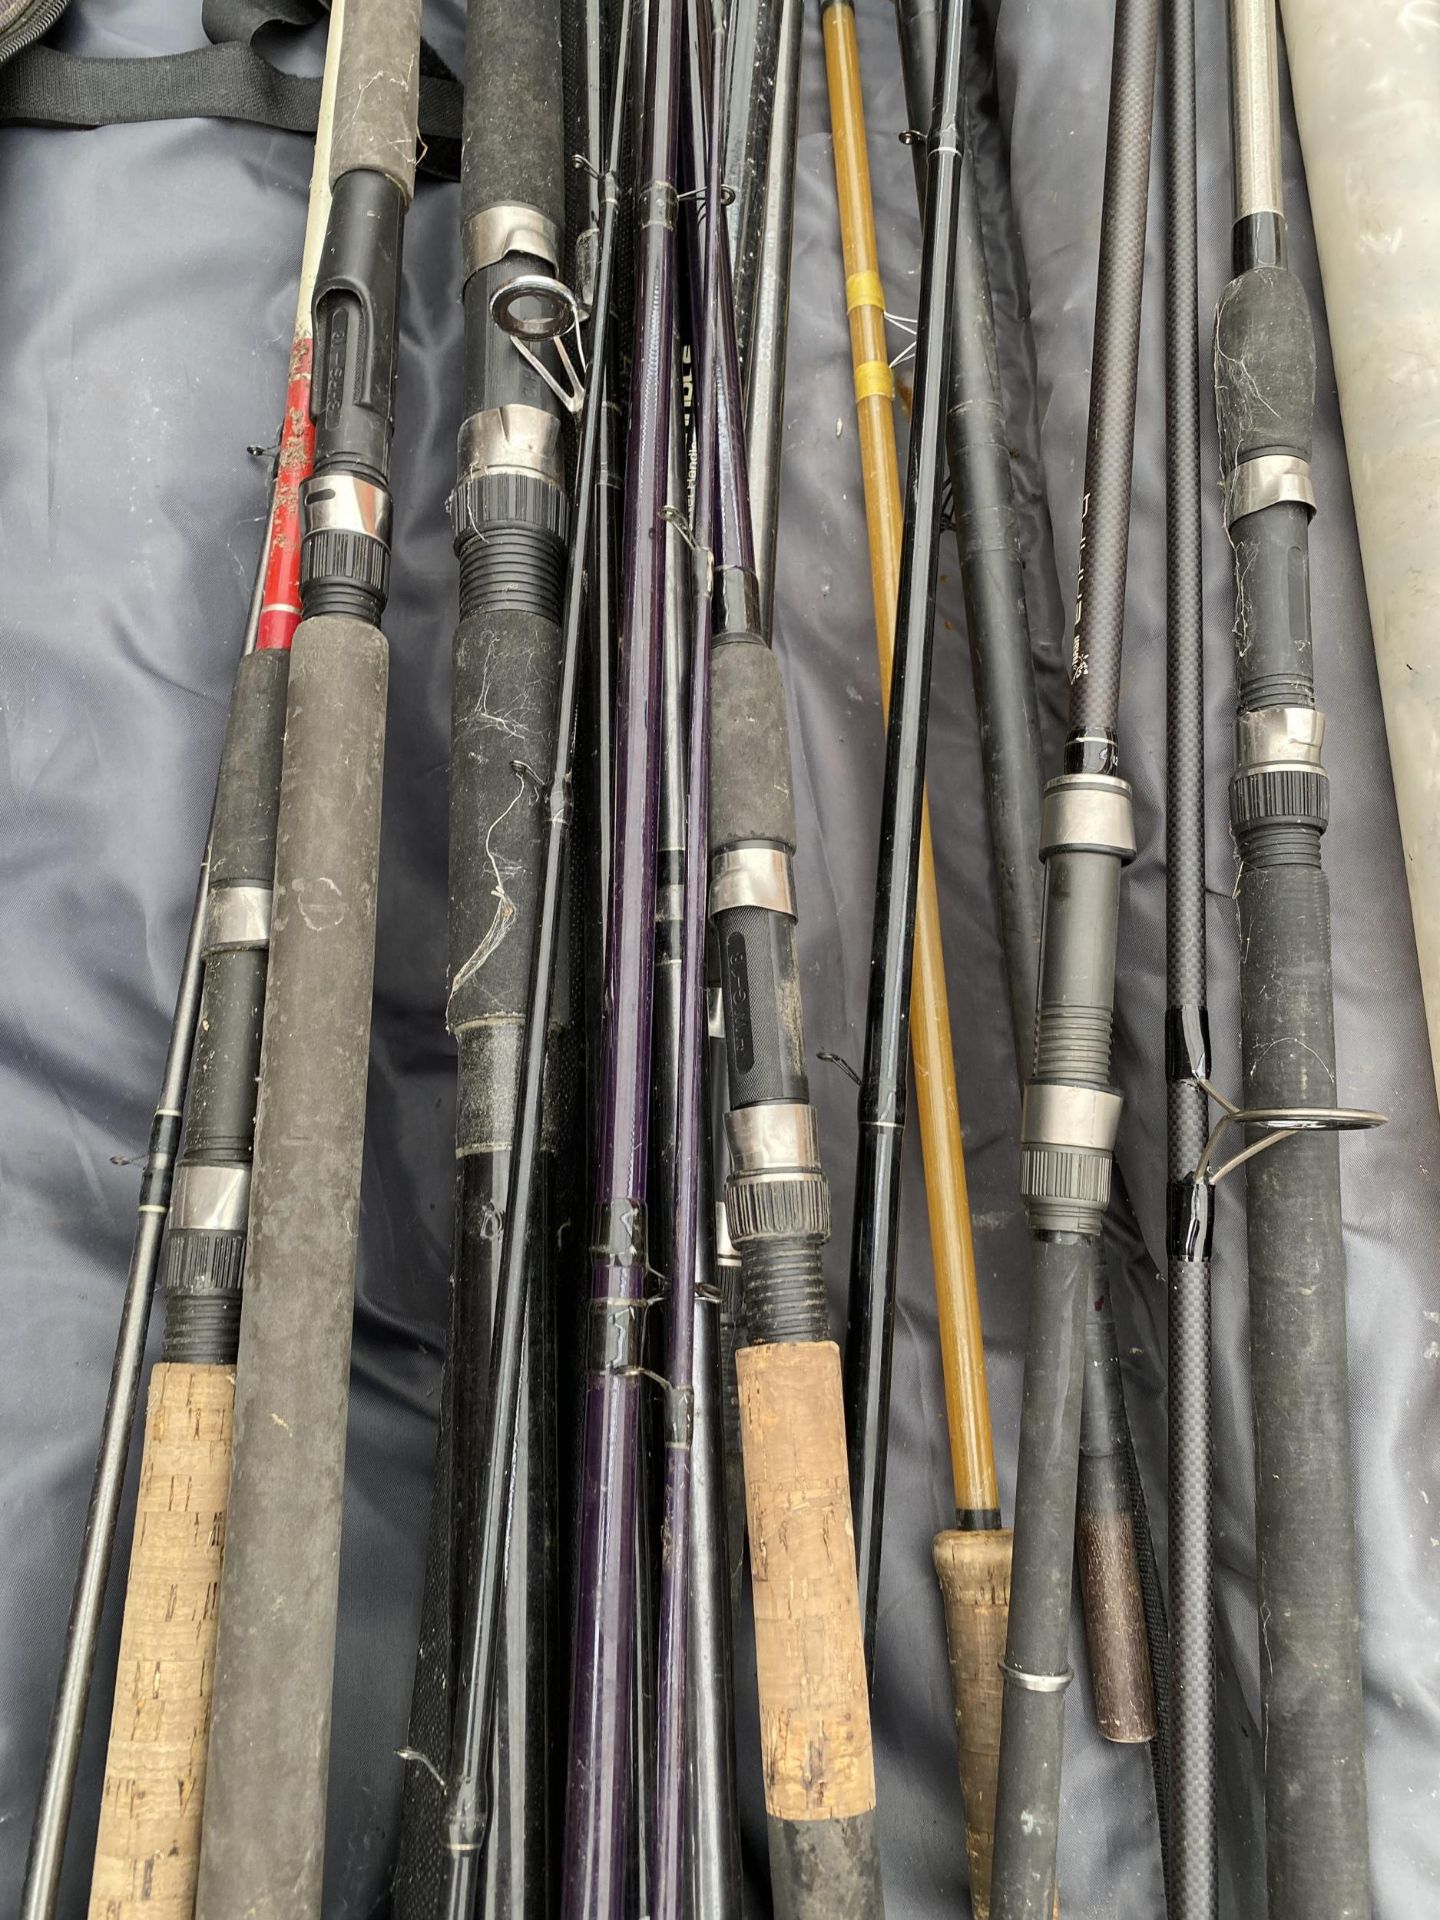 A LARGE ASSORTMENT OF FISHING RODS AND A TUBE OF GOLF BALLS - Image 2 of 9